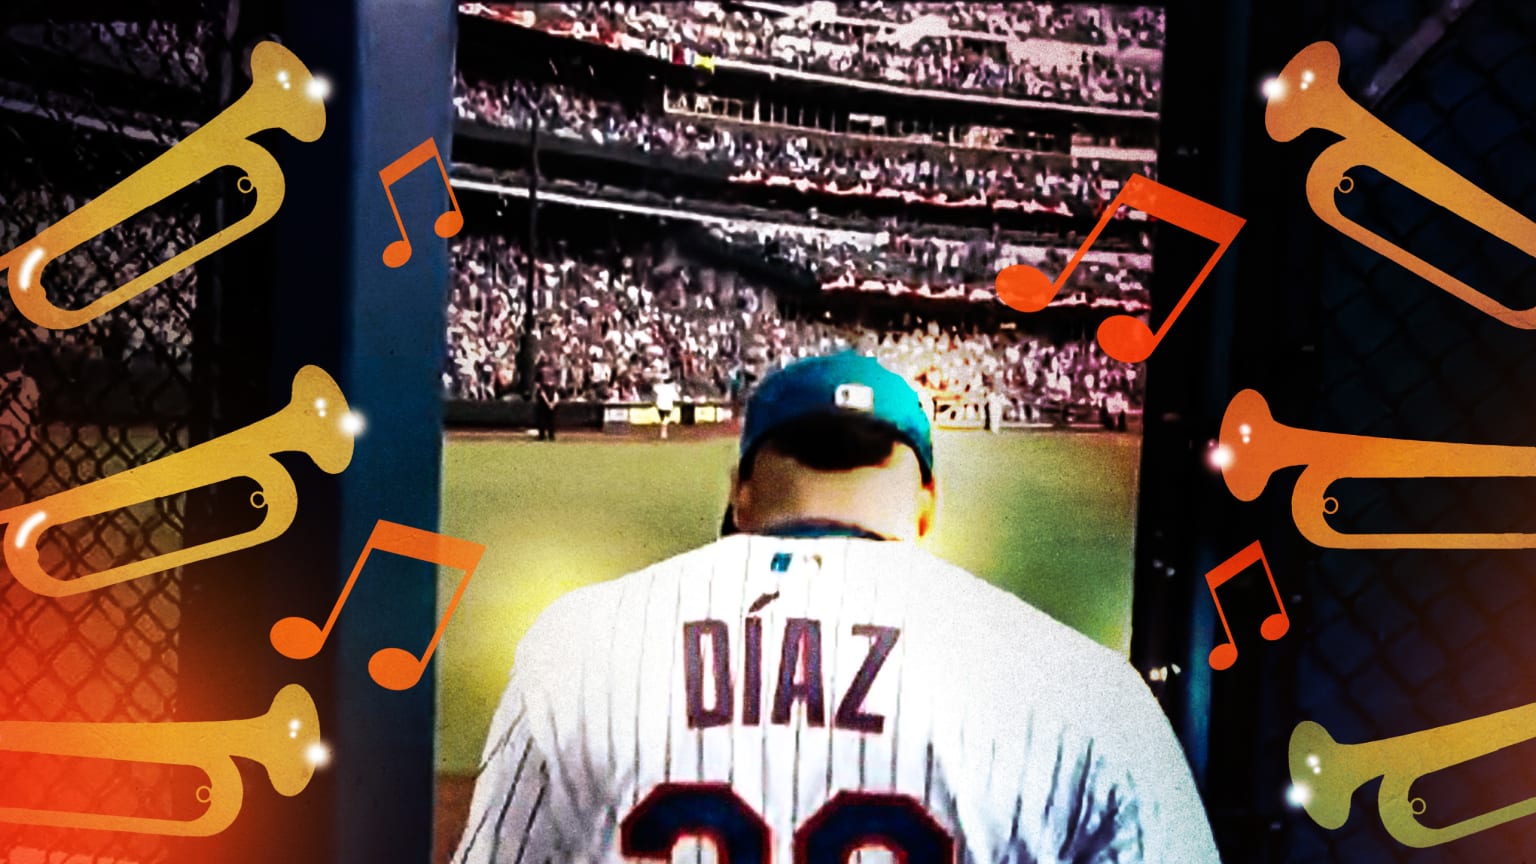 A photo of the back of Mets pitcher Edwin Diaz as he leaves the bullpen for the field, surrounded by graphics of trumpets and musical notes